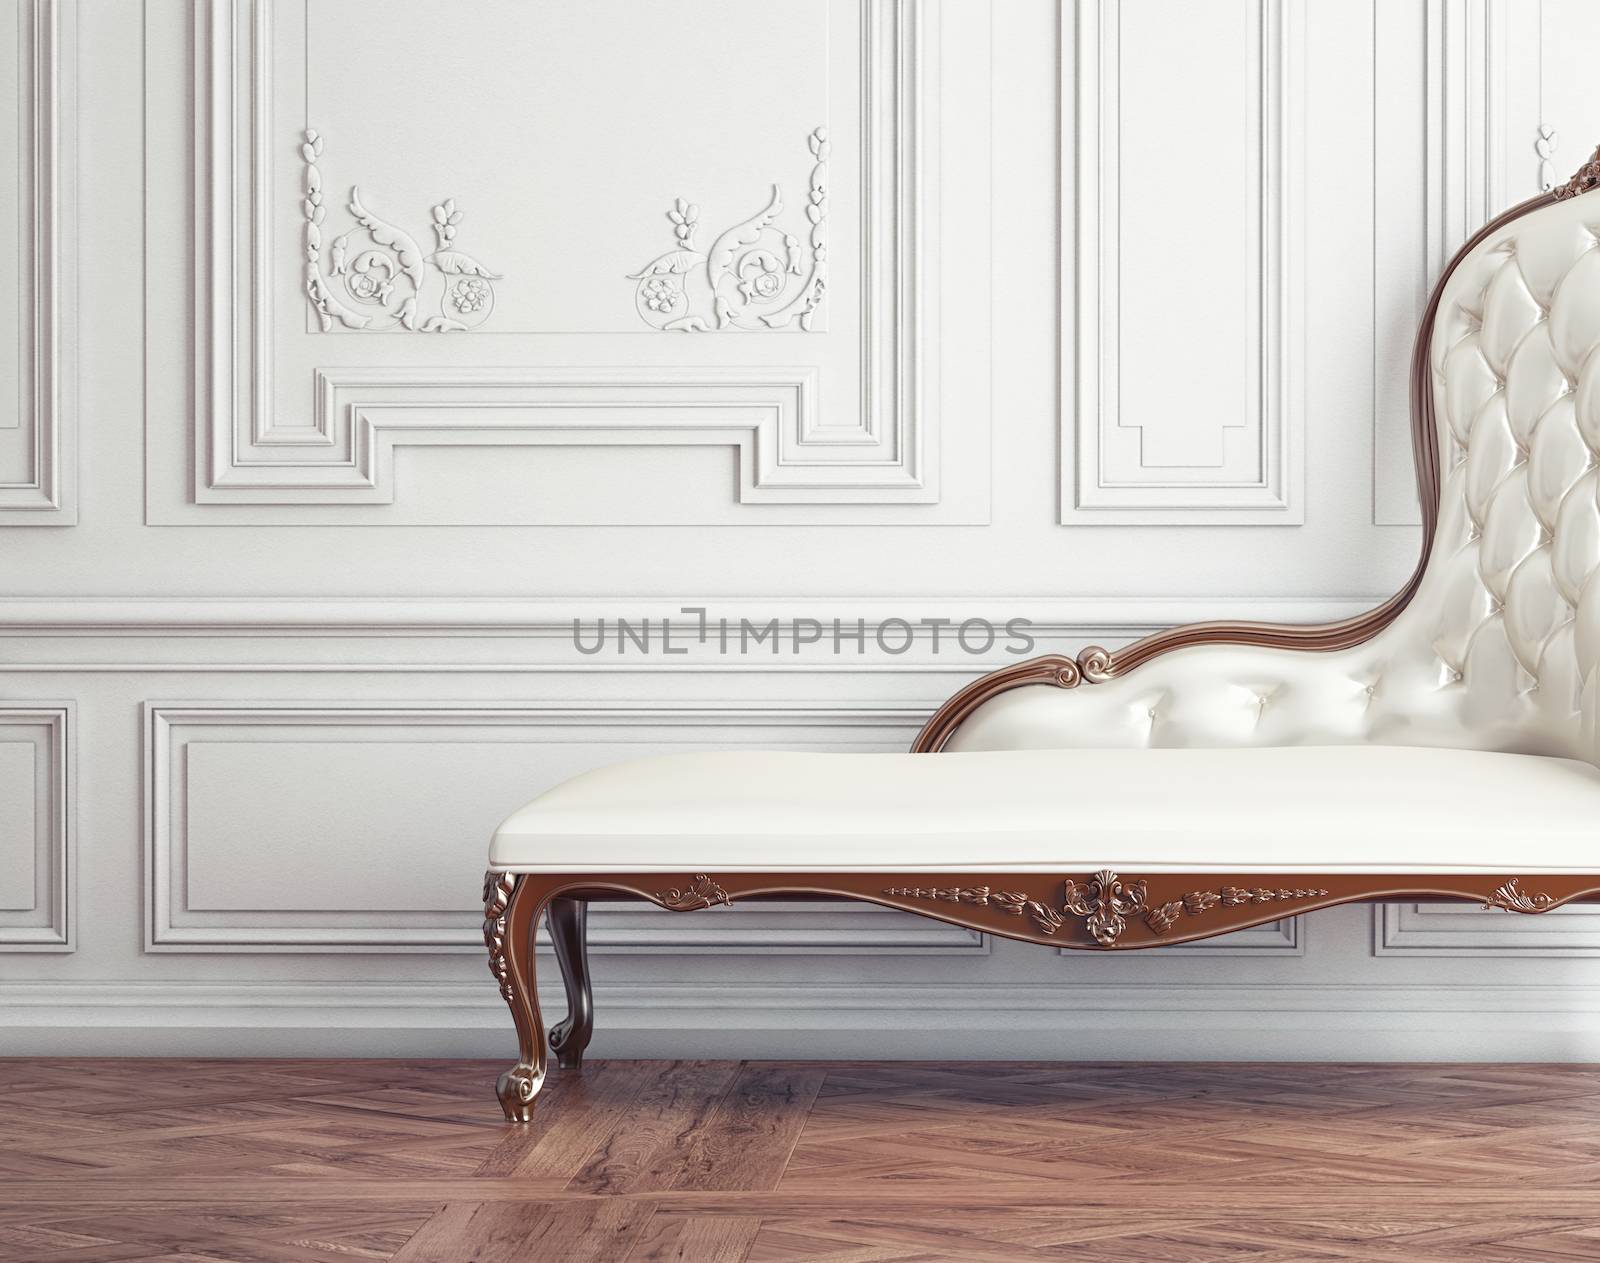 The beautiful vintage sofa next to the wall (retro-style illustration) 